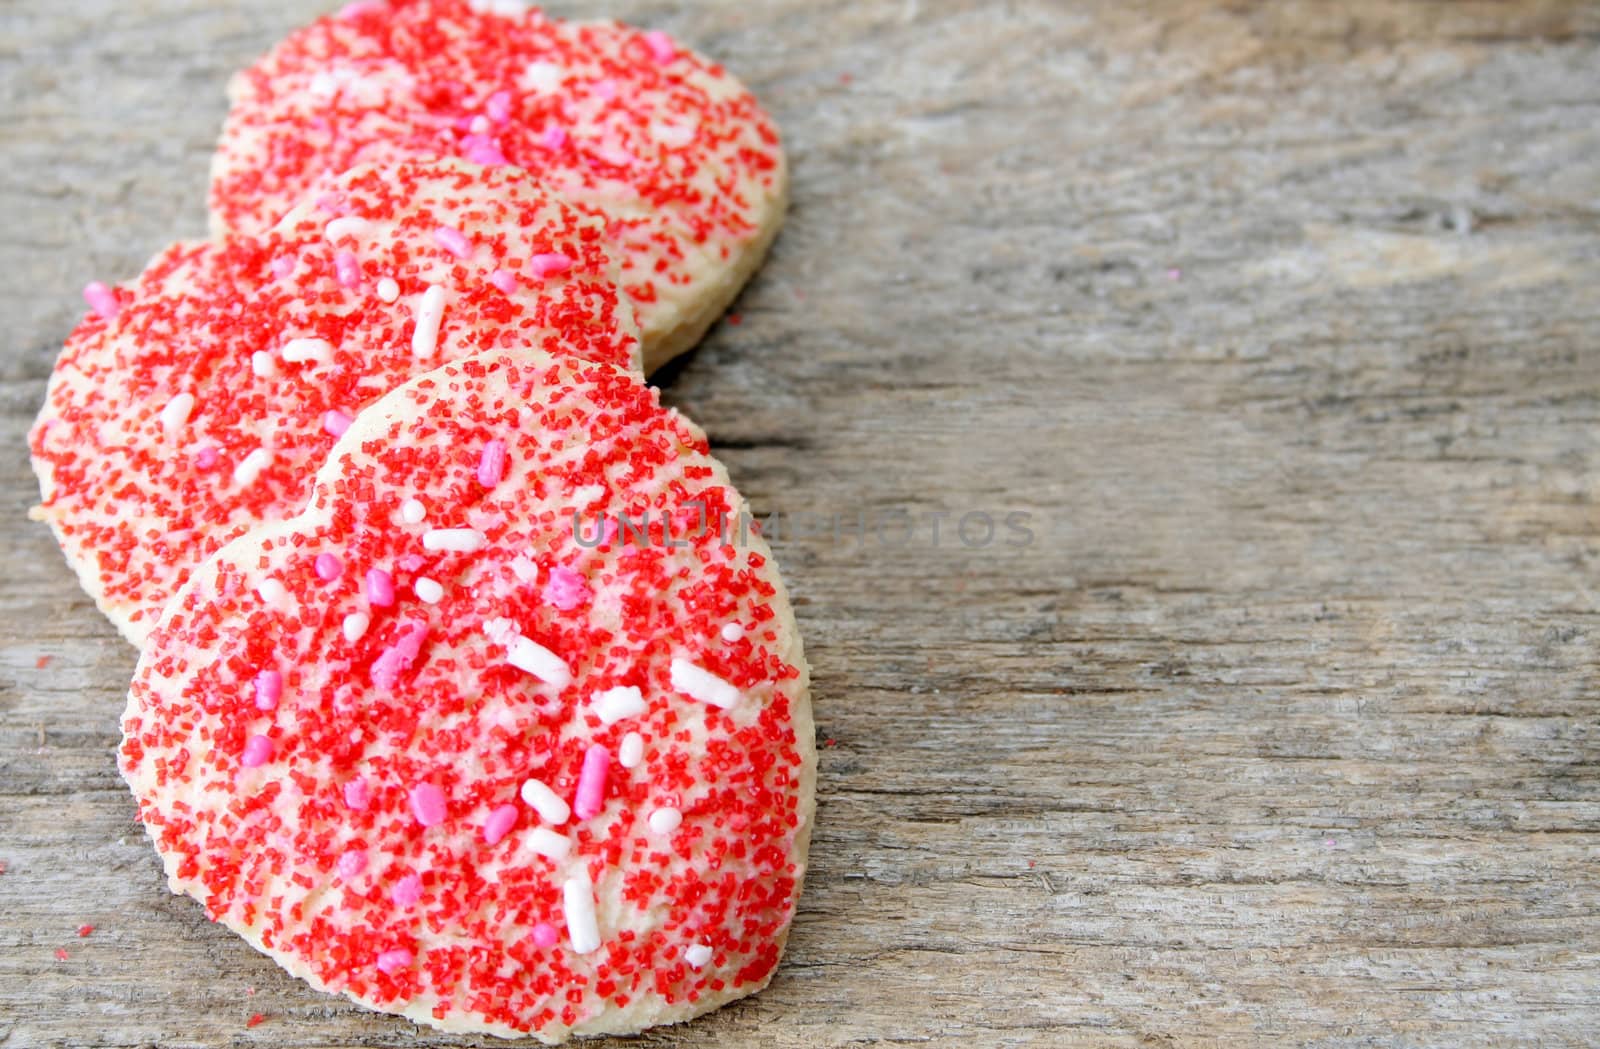 Heart shaped cookies with sprinkles.